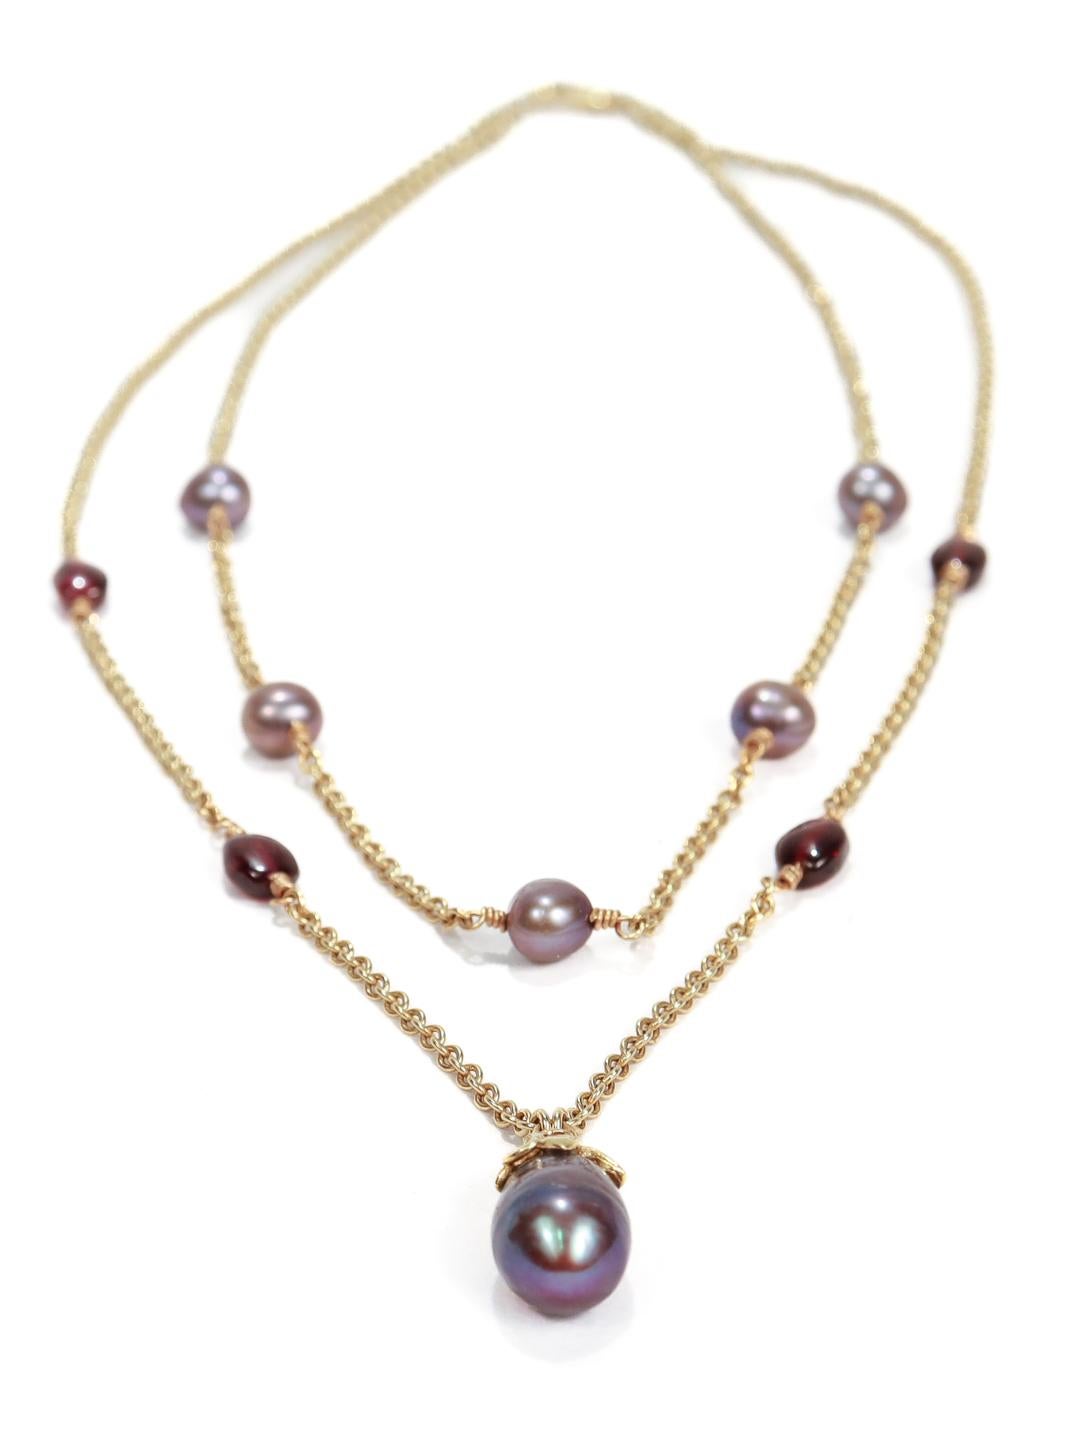 Lazaro Diaz Layered Double Chain 18k Gold, Amethyst, & Tahitian Pearl Necklace For Sale 4